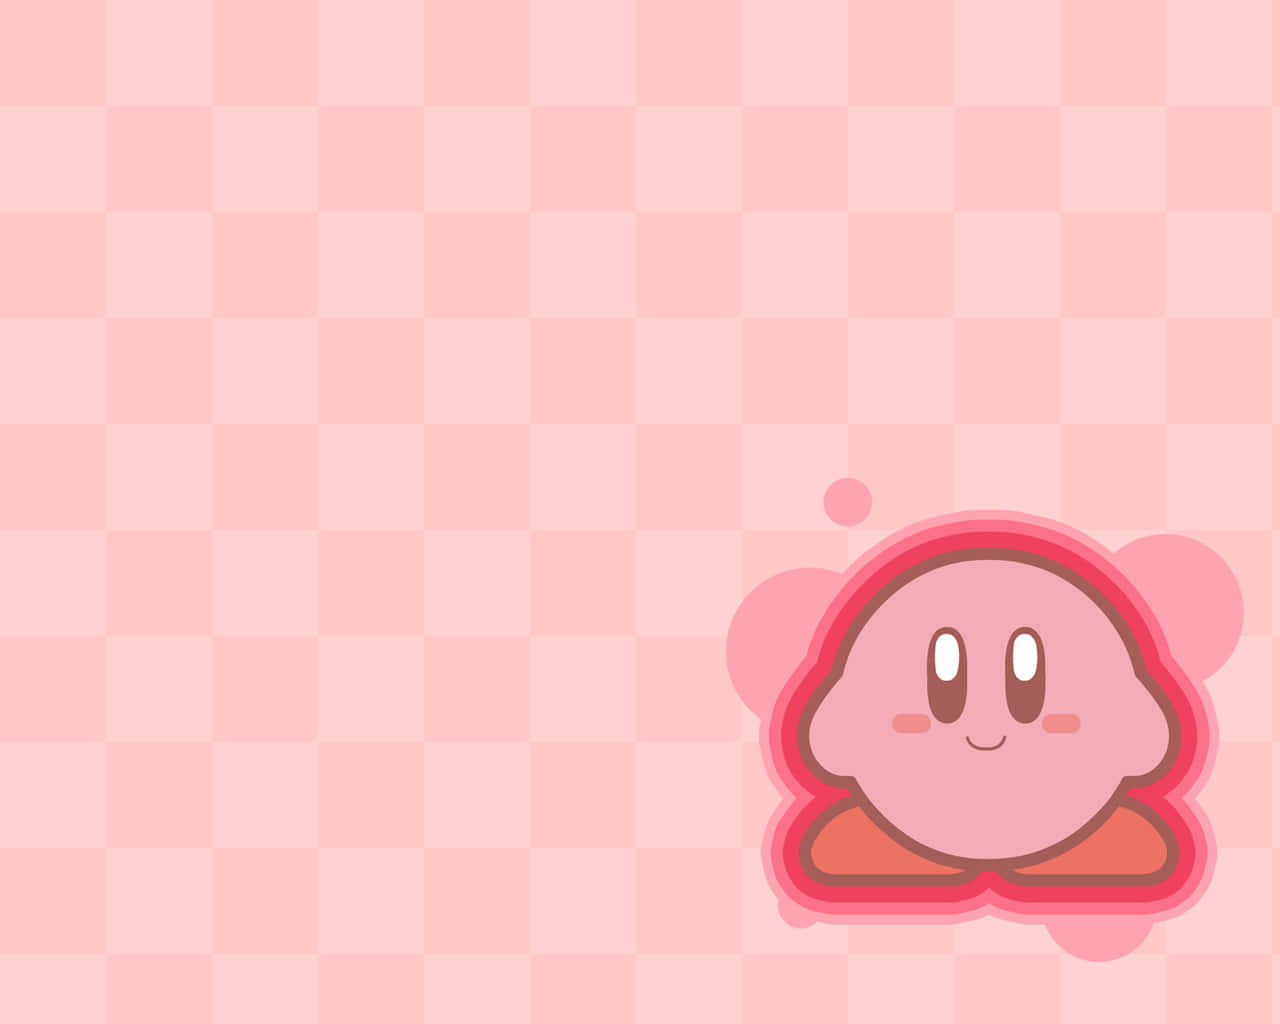 Embark on an adventure with Kirby - the brave puffball that defends Dream Land from evil forces!